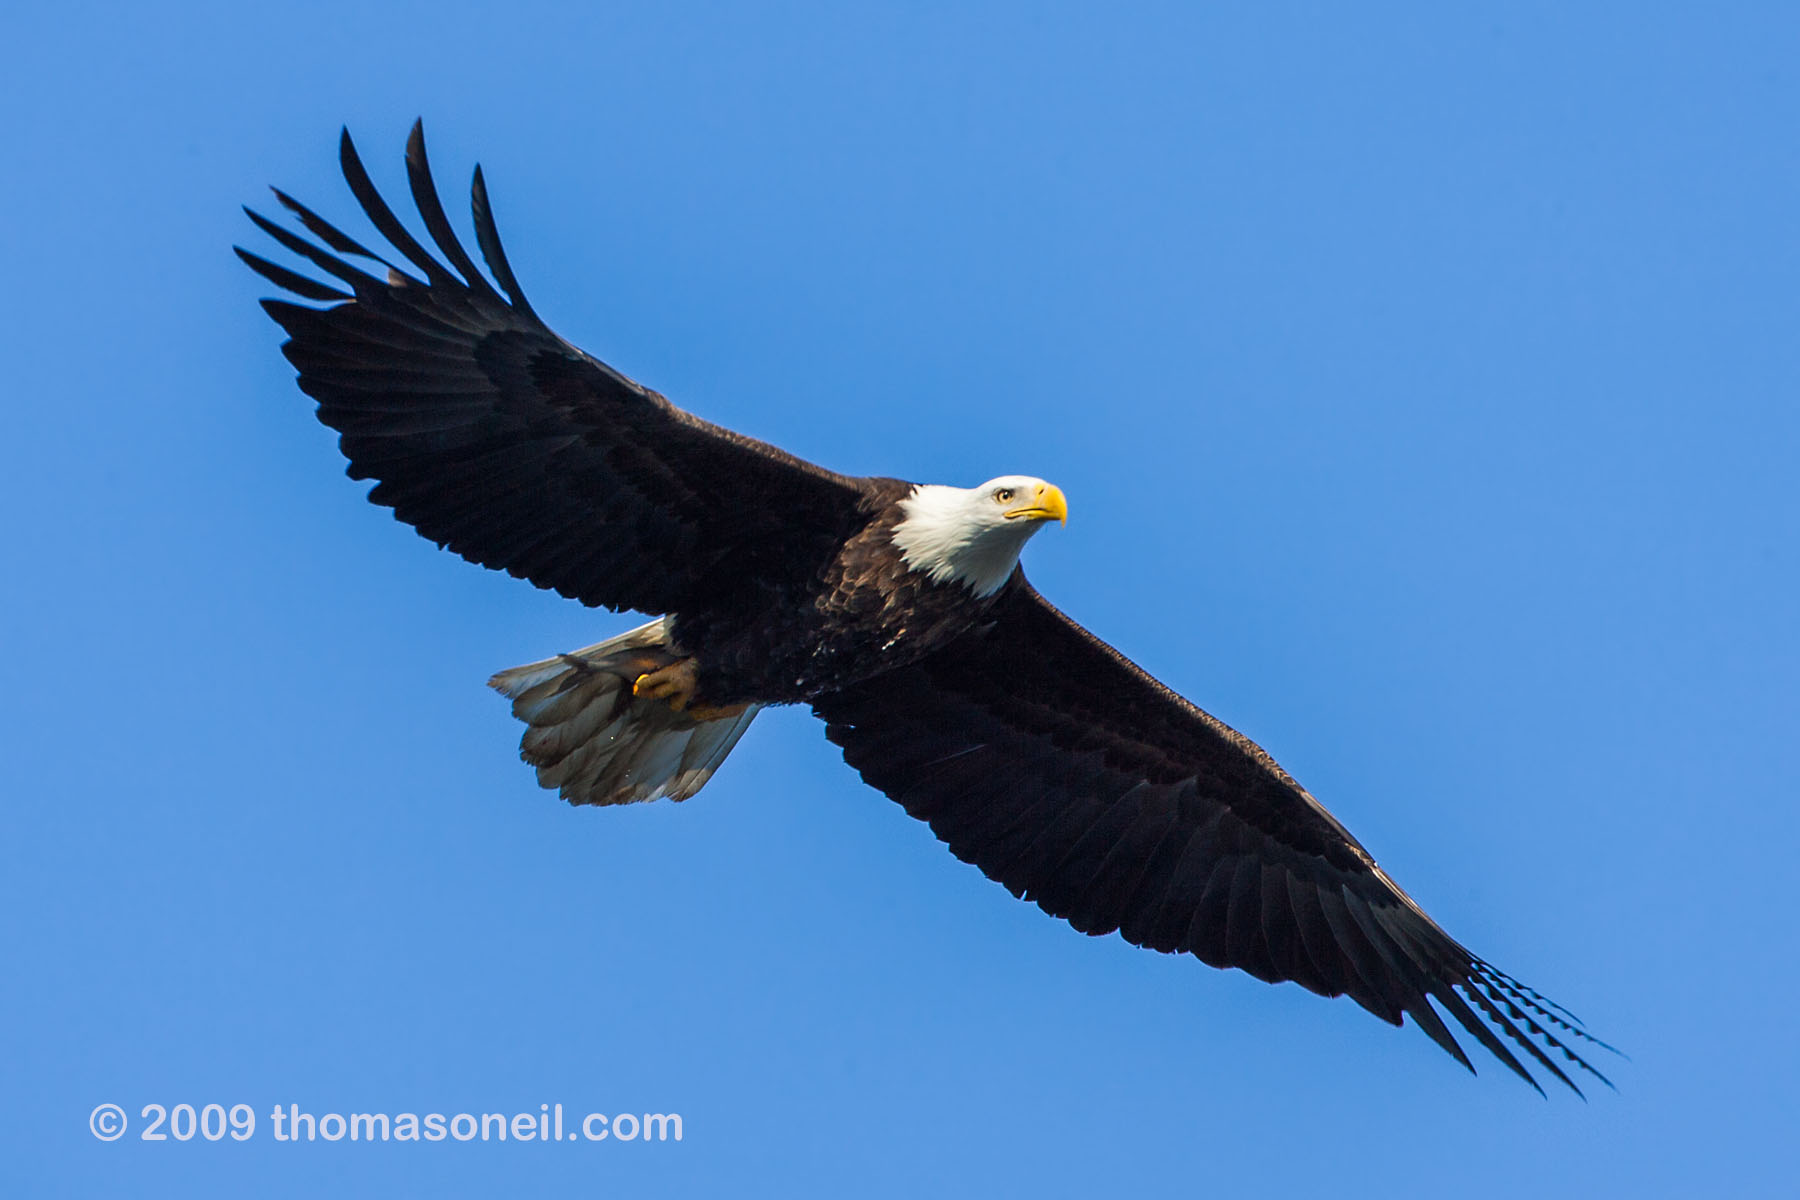 Bald eagle carrying a fish from the Mississippi River, Keokuk, Iowa.  Click for next photo.